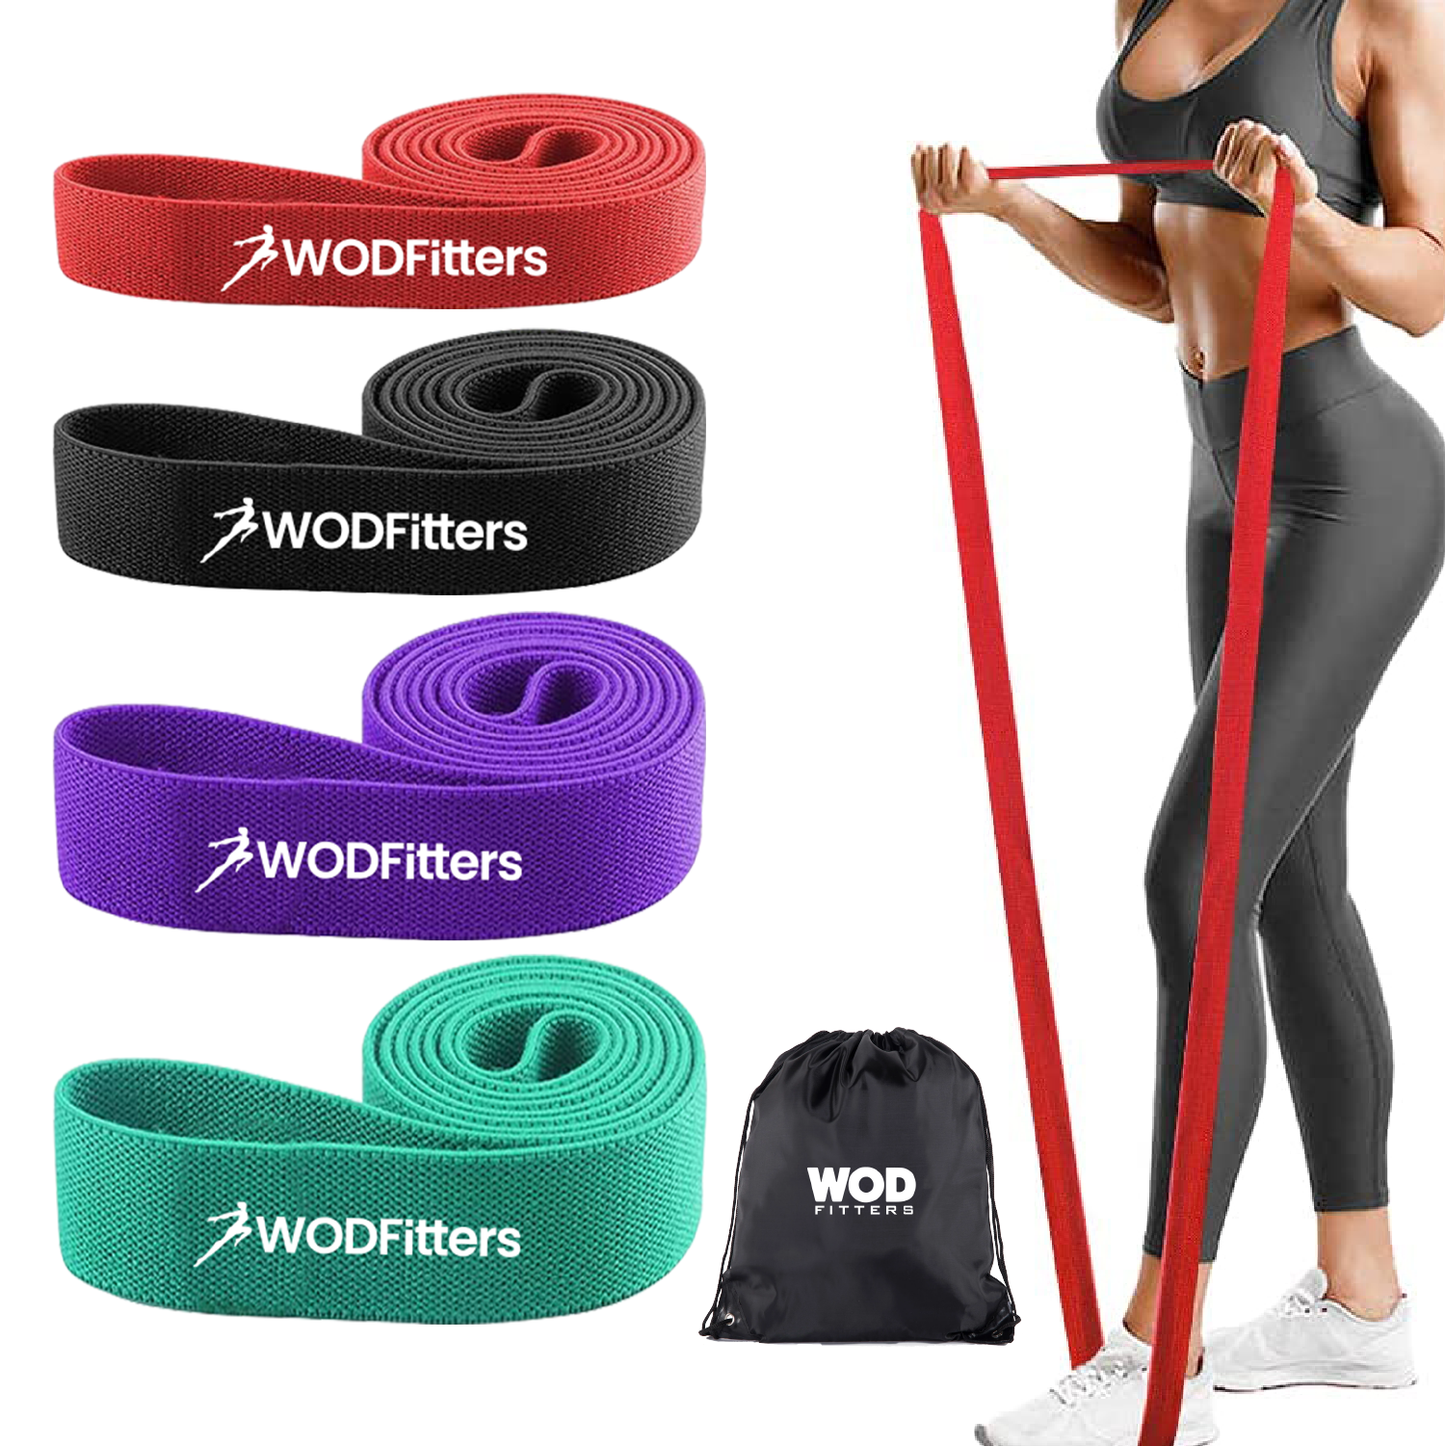 WODFitters Fabric Pull Up Resistance Bands - 4 Band Set - Set of 4 Fabric Resistance Bands (41" loop) for Exercise, Stretching, Home Workout